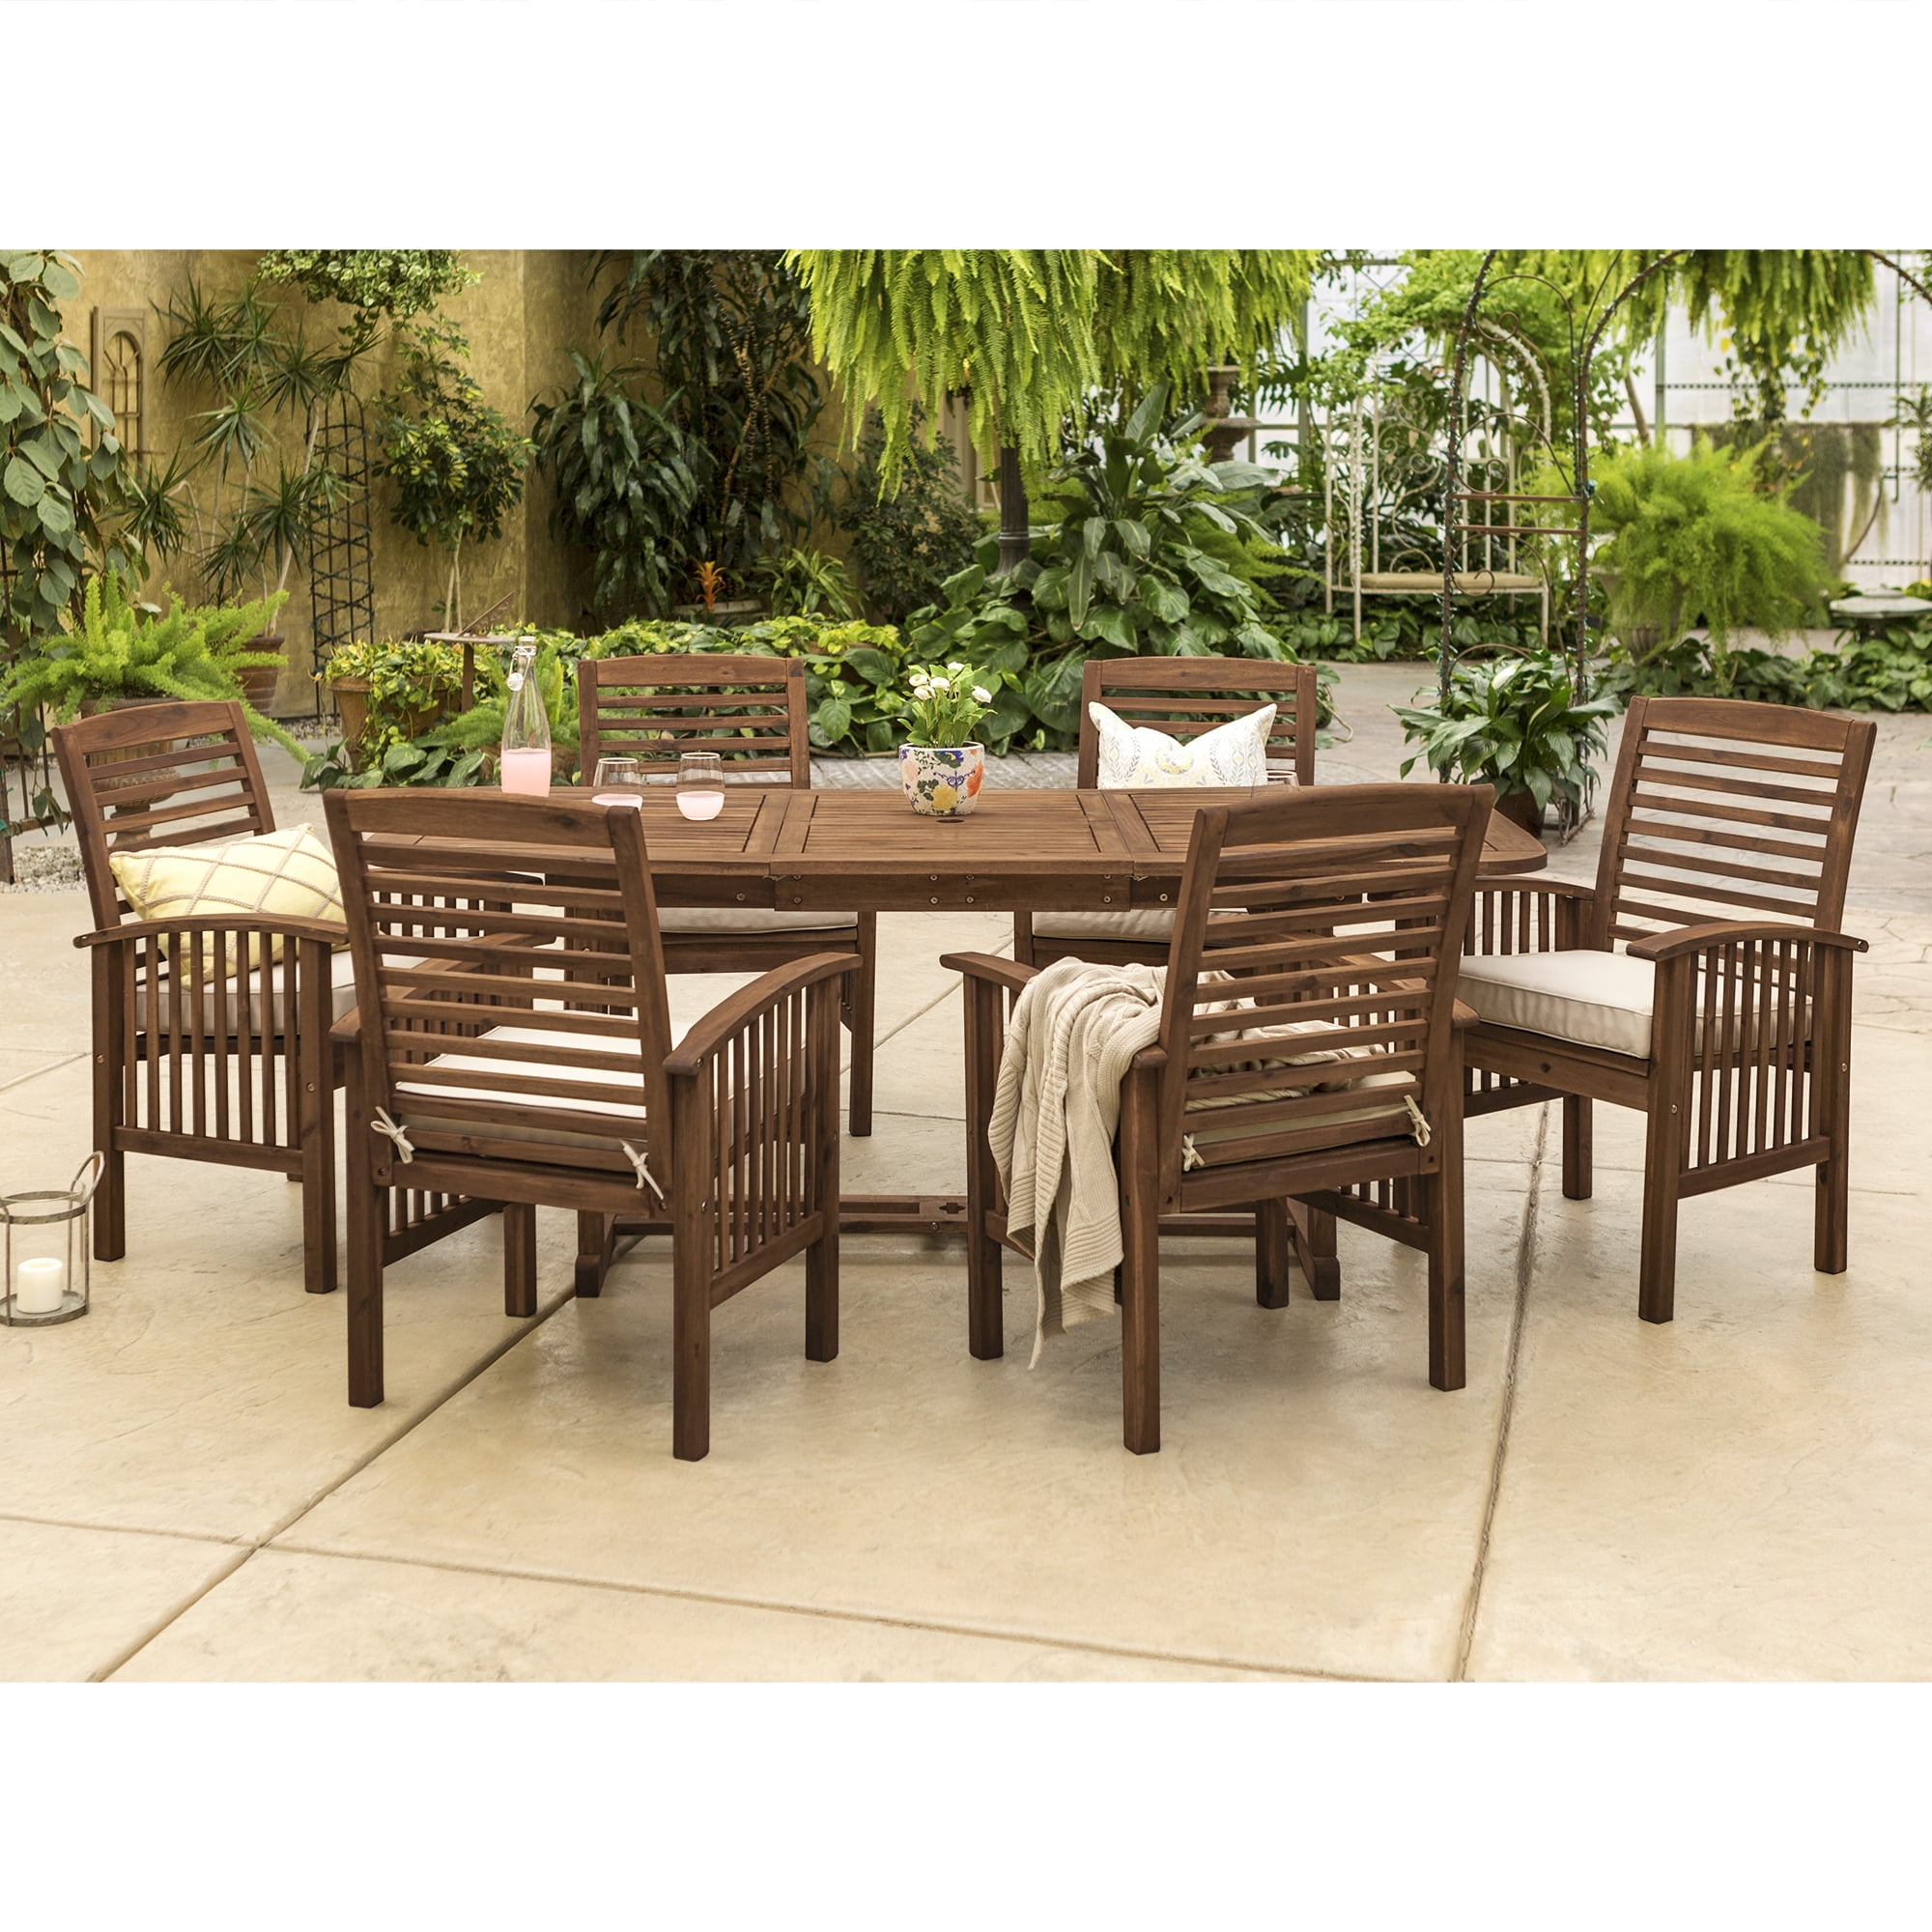 Wood Outdoor Dining Sets Off 58, Wood Outdoor Dining Sets